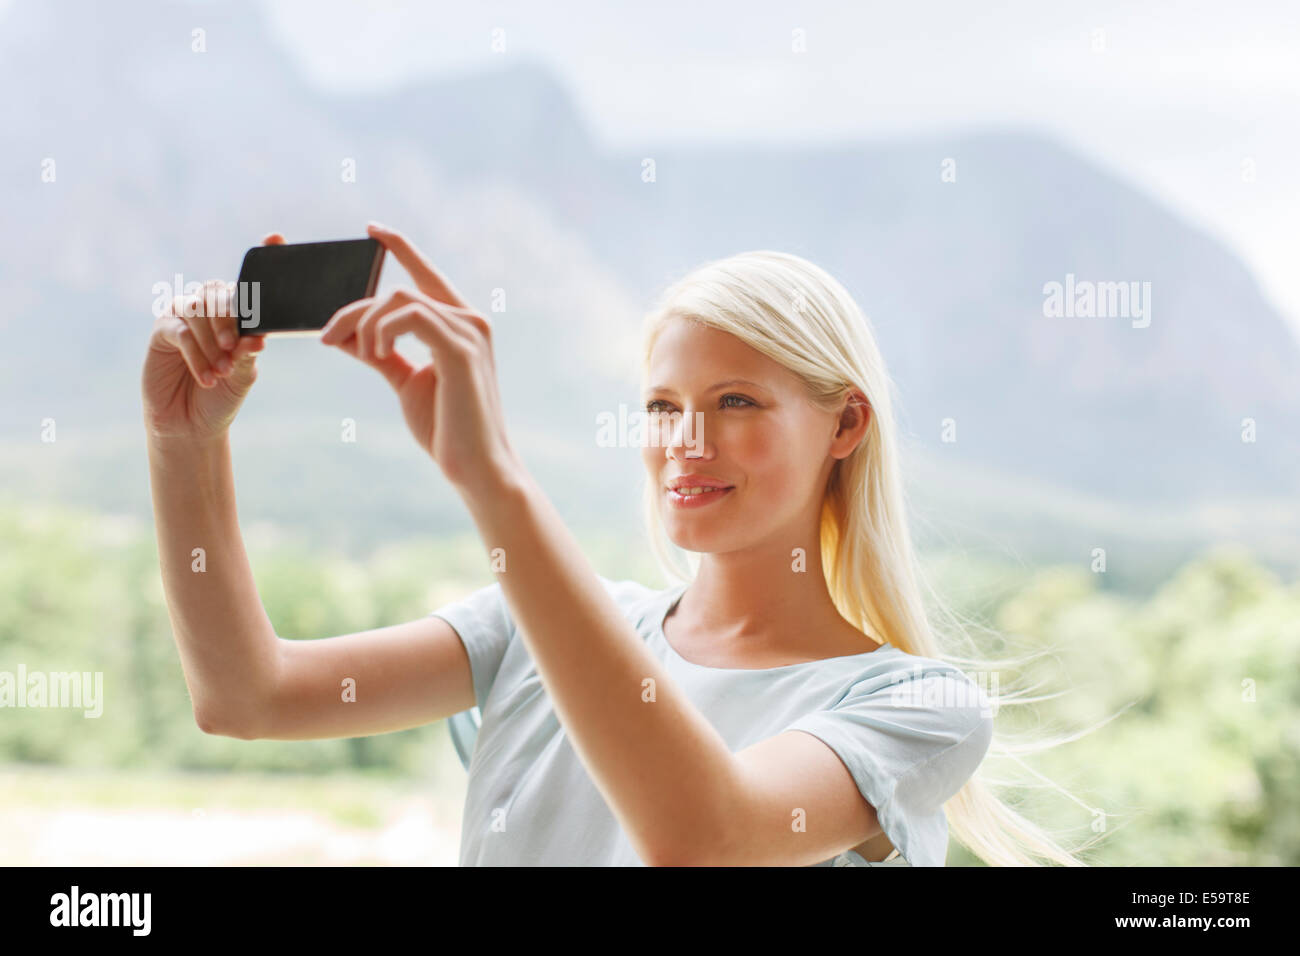 Woman taking pictures in rural landscape Stock Photo